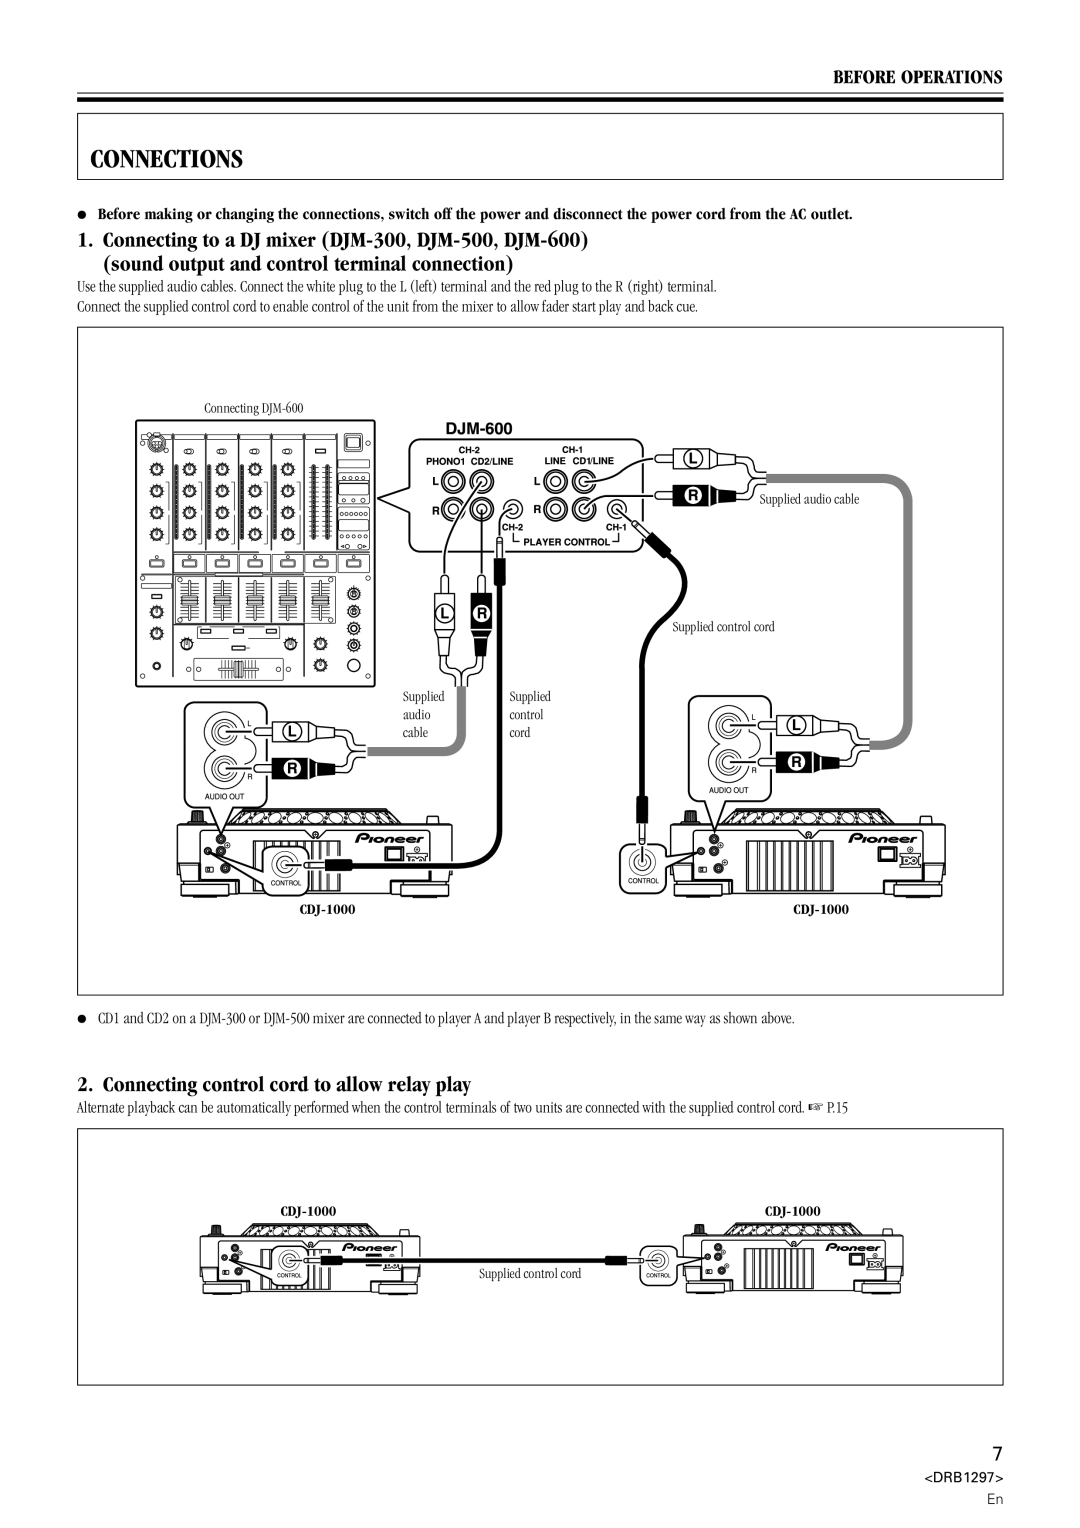 Pioneer CDJ-1000 operating instructions Connections, Connecting control cord to allow relay play, Before Operations 